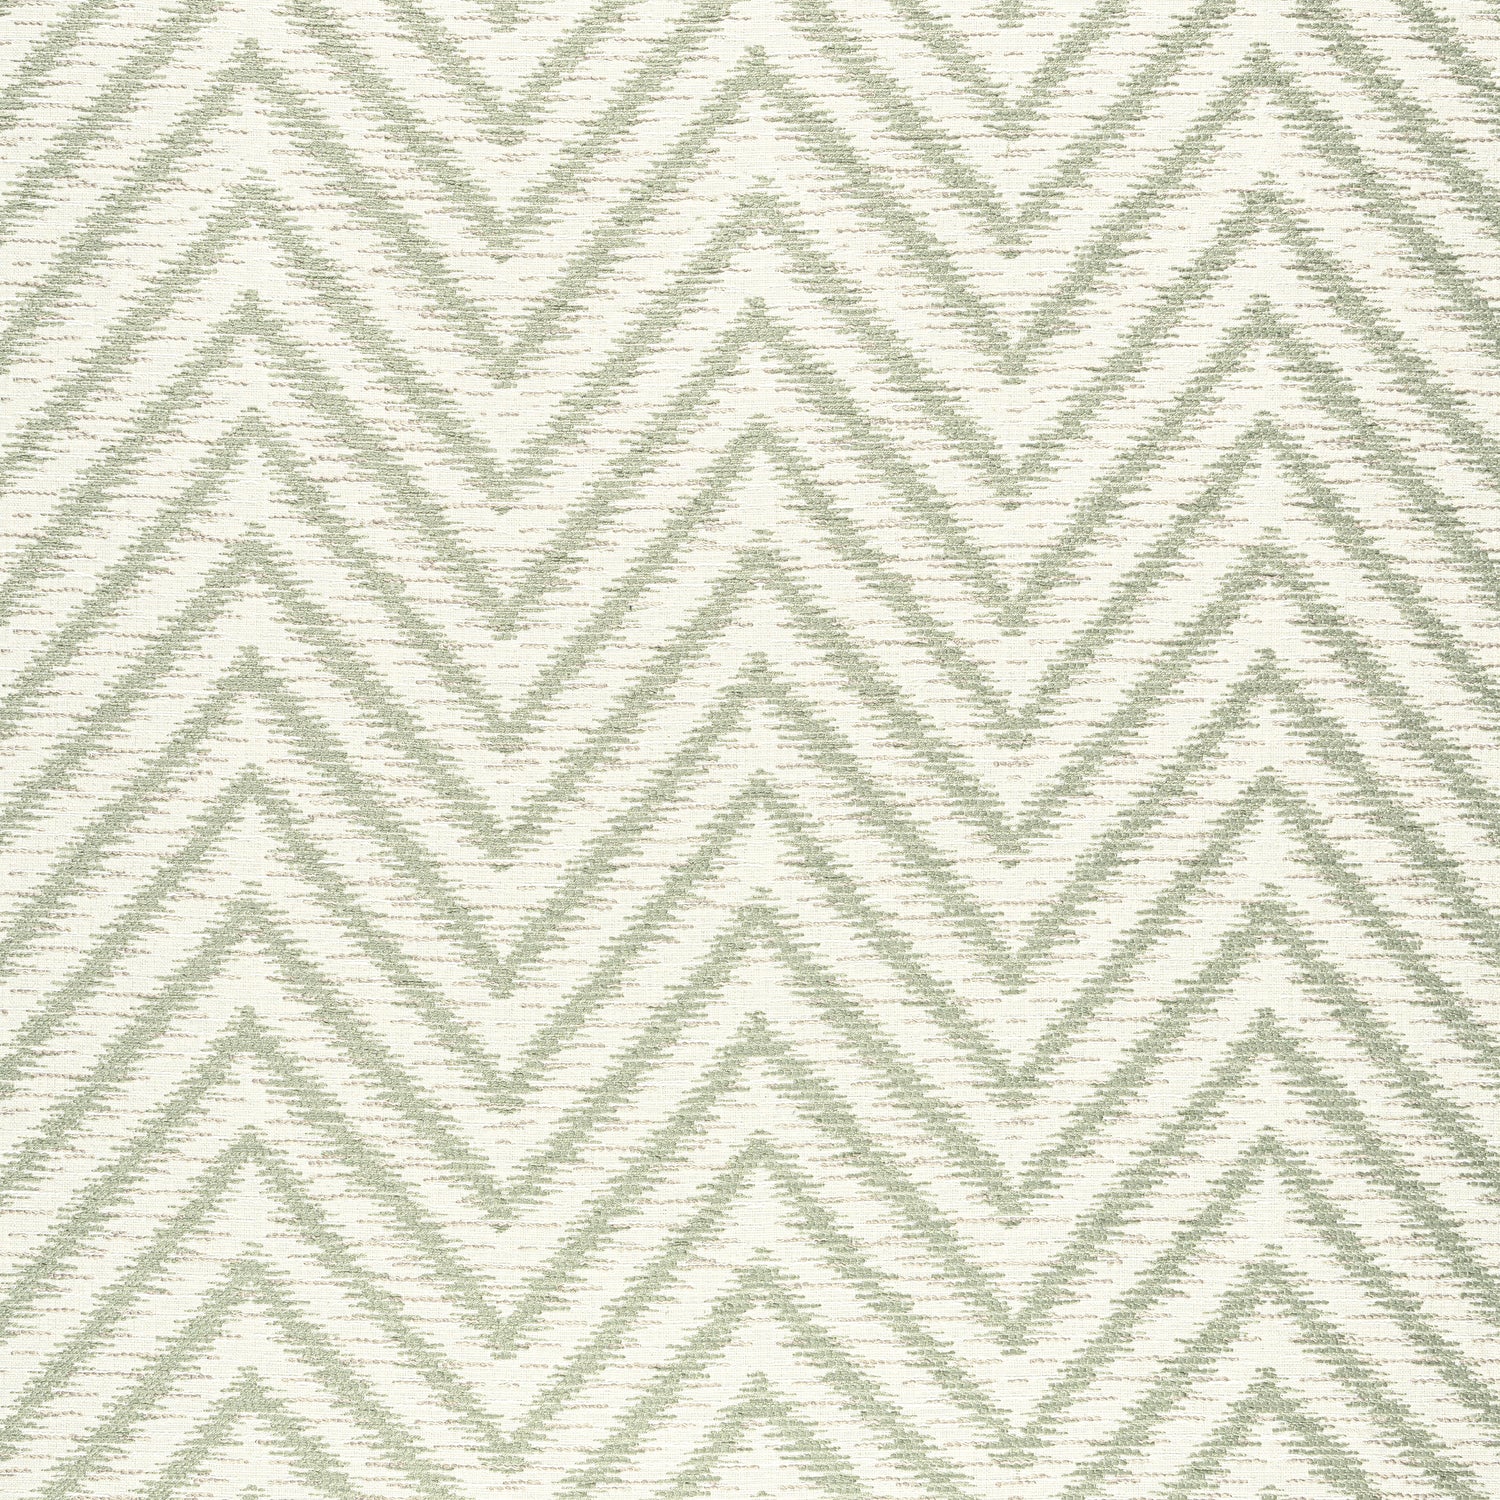 Aliso fabric in aloe color - pattern number W8817 - by Thibaut in the Haven collection